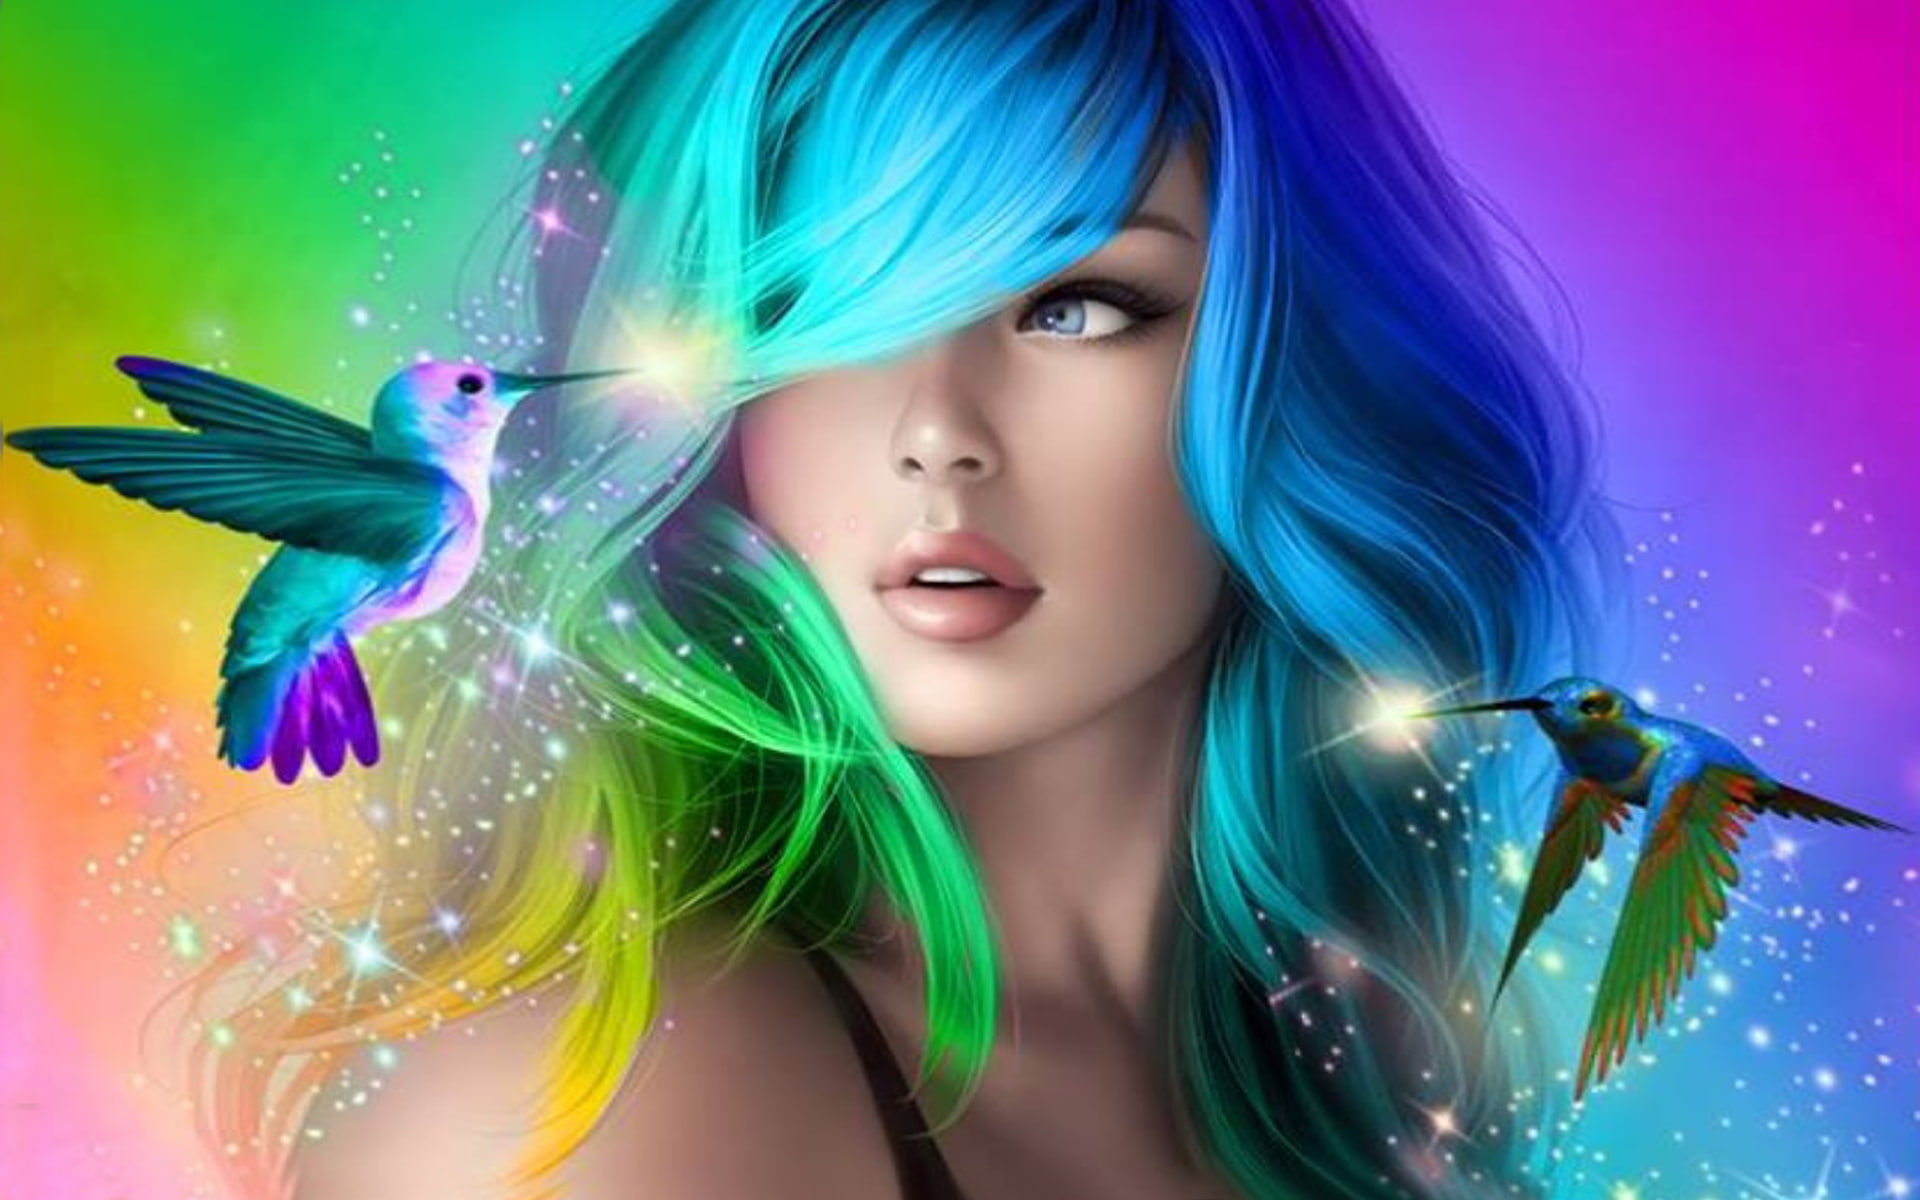 Beautiful Girl With Colorful Hair Desktop Wallpaper Hd For Mobile Phones And Laptops